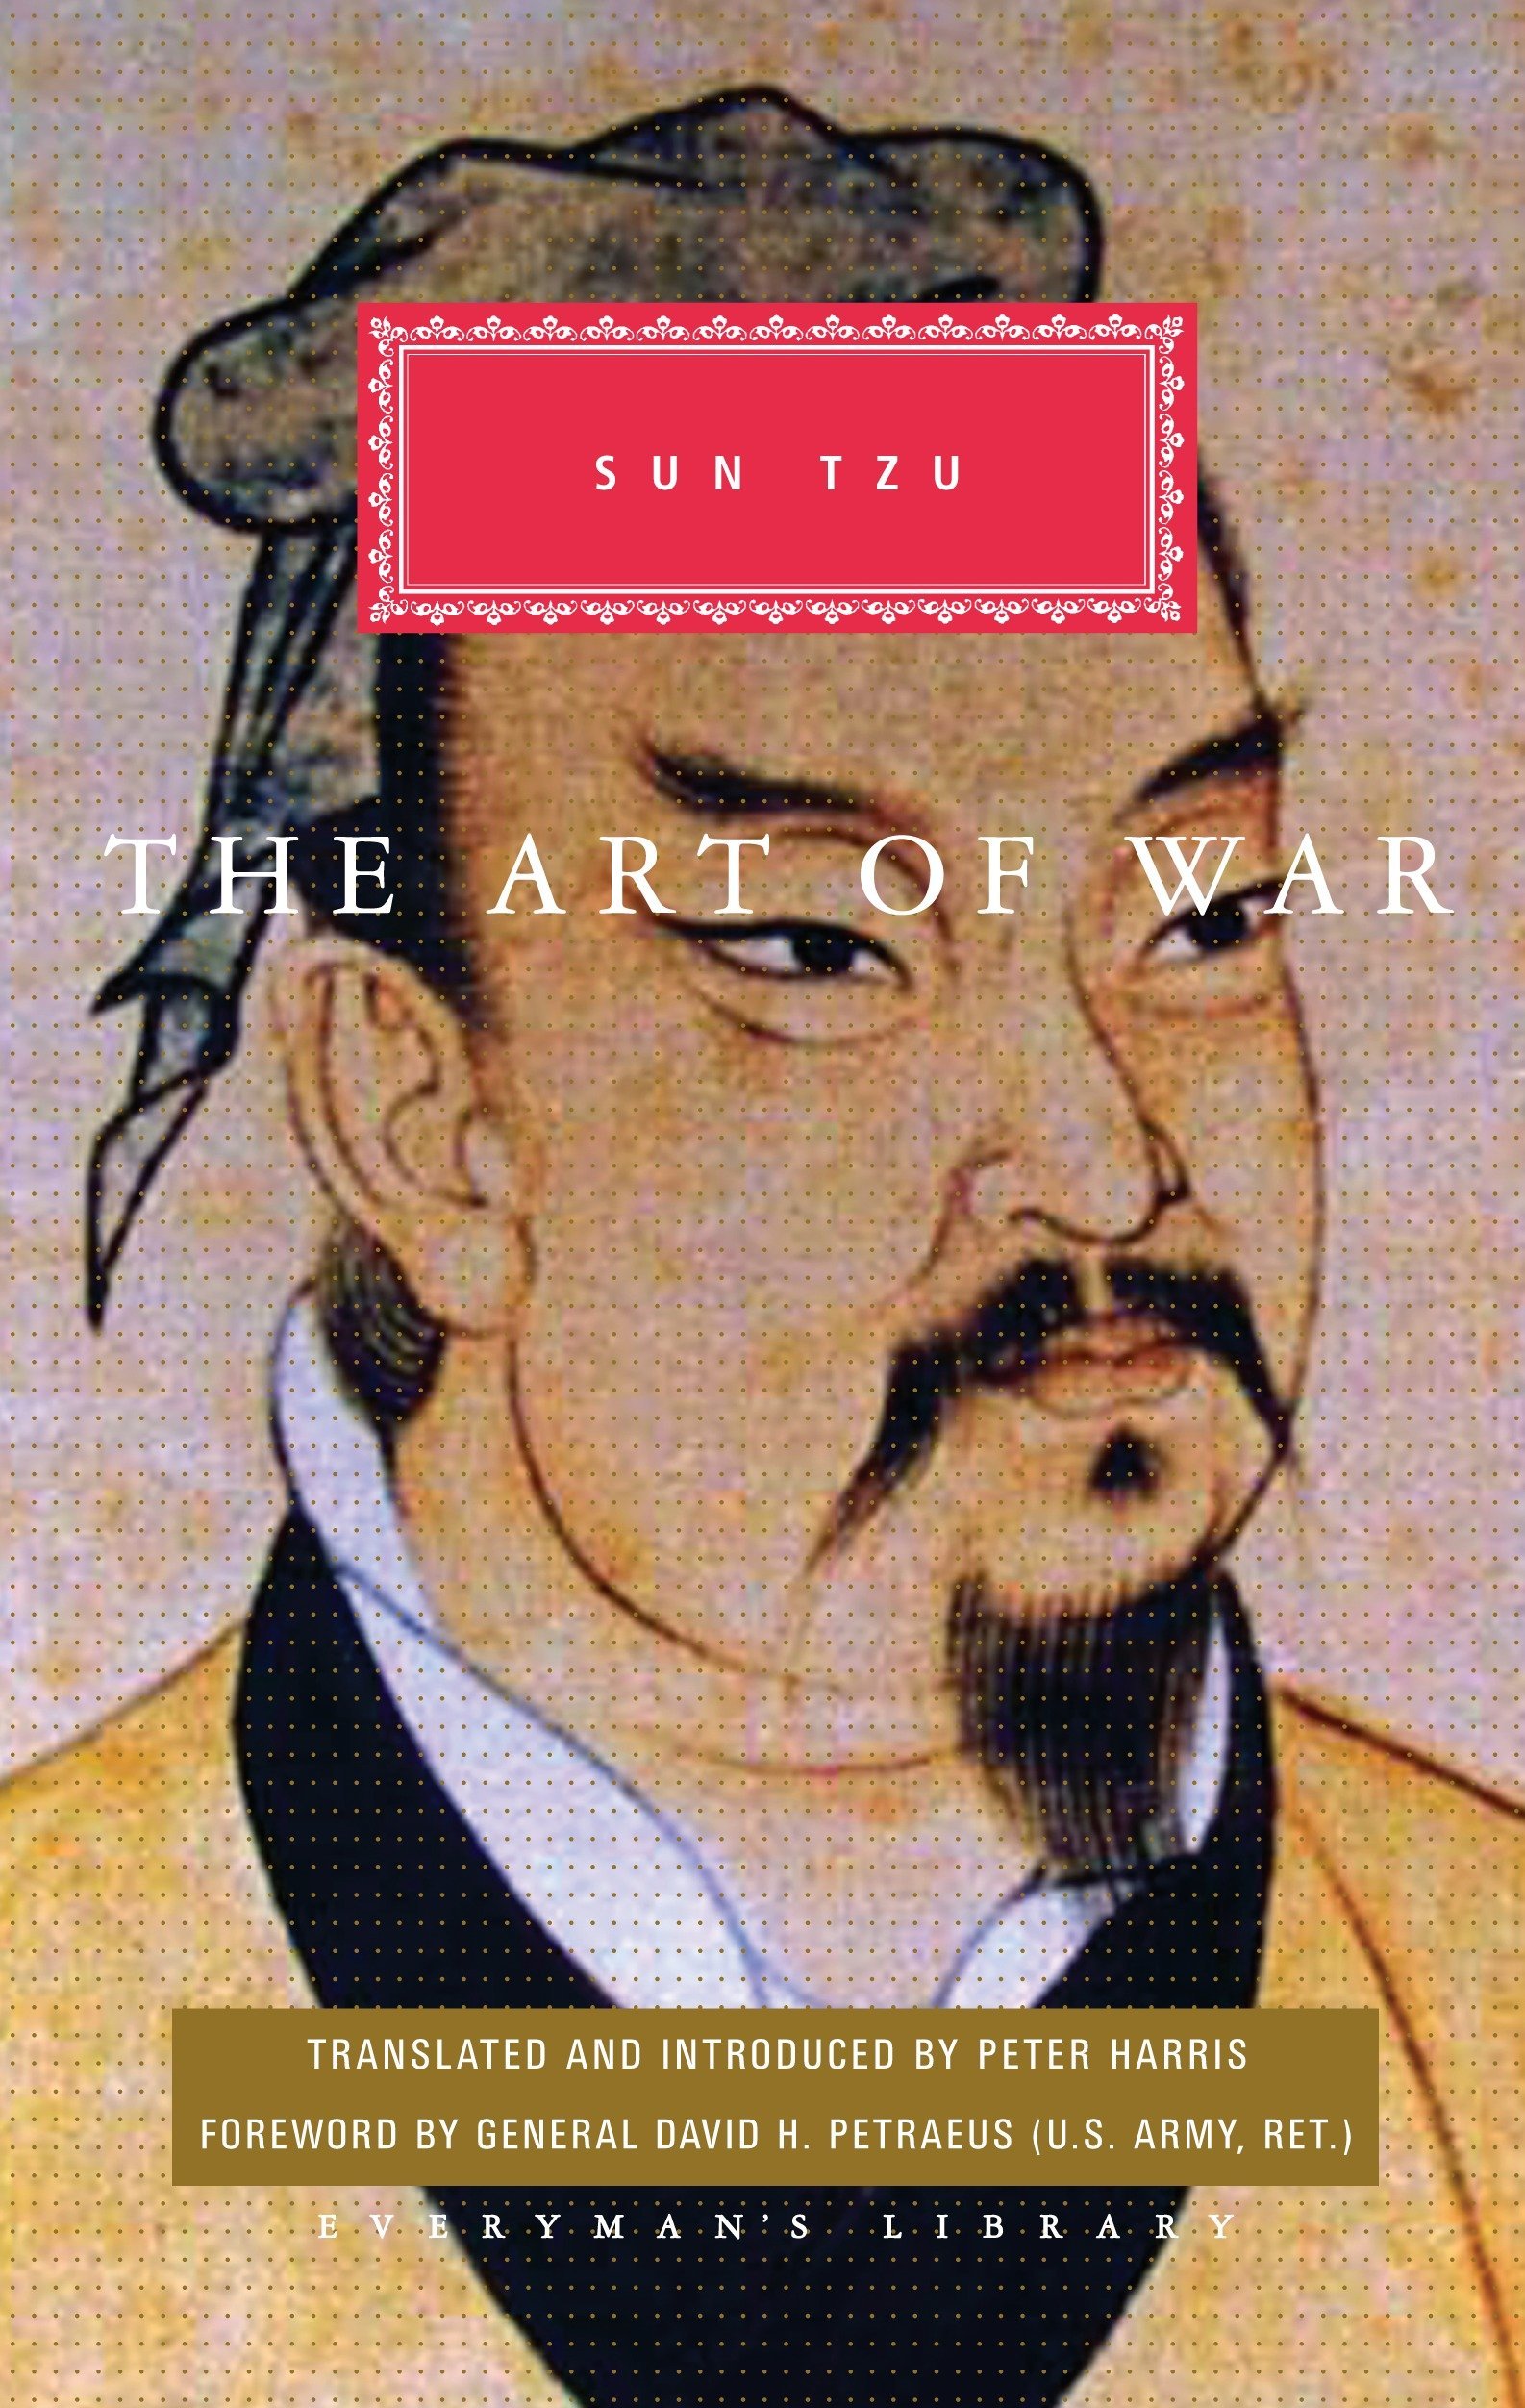 The Art of War: Translated and Introduced by Peter Harris (Everyman's Library Classics Series)